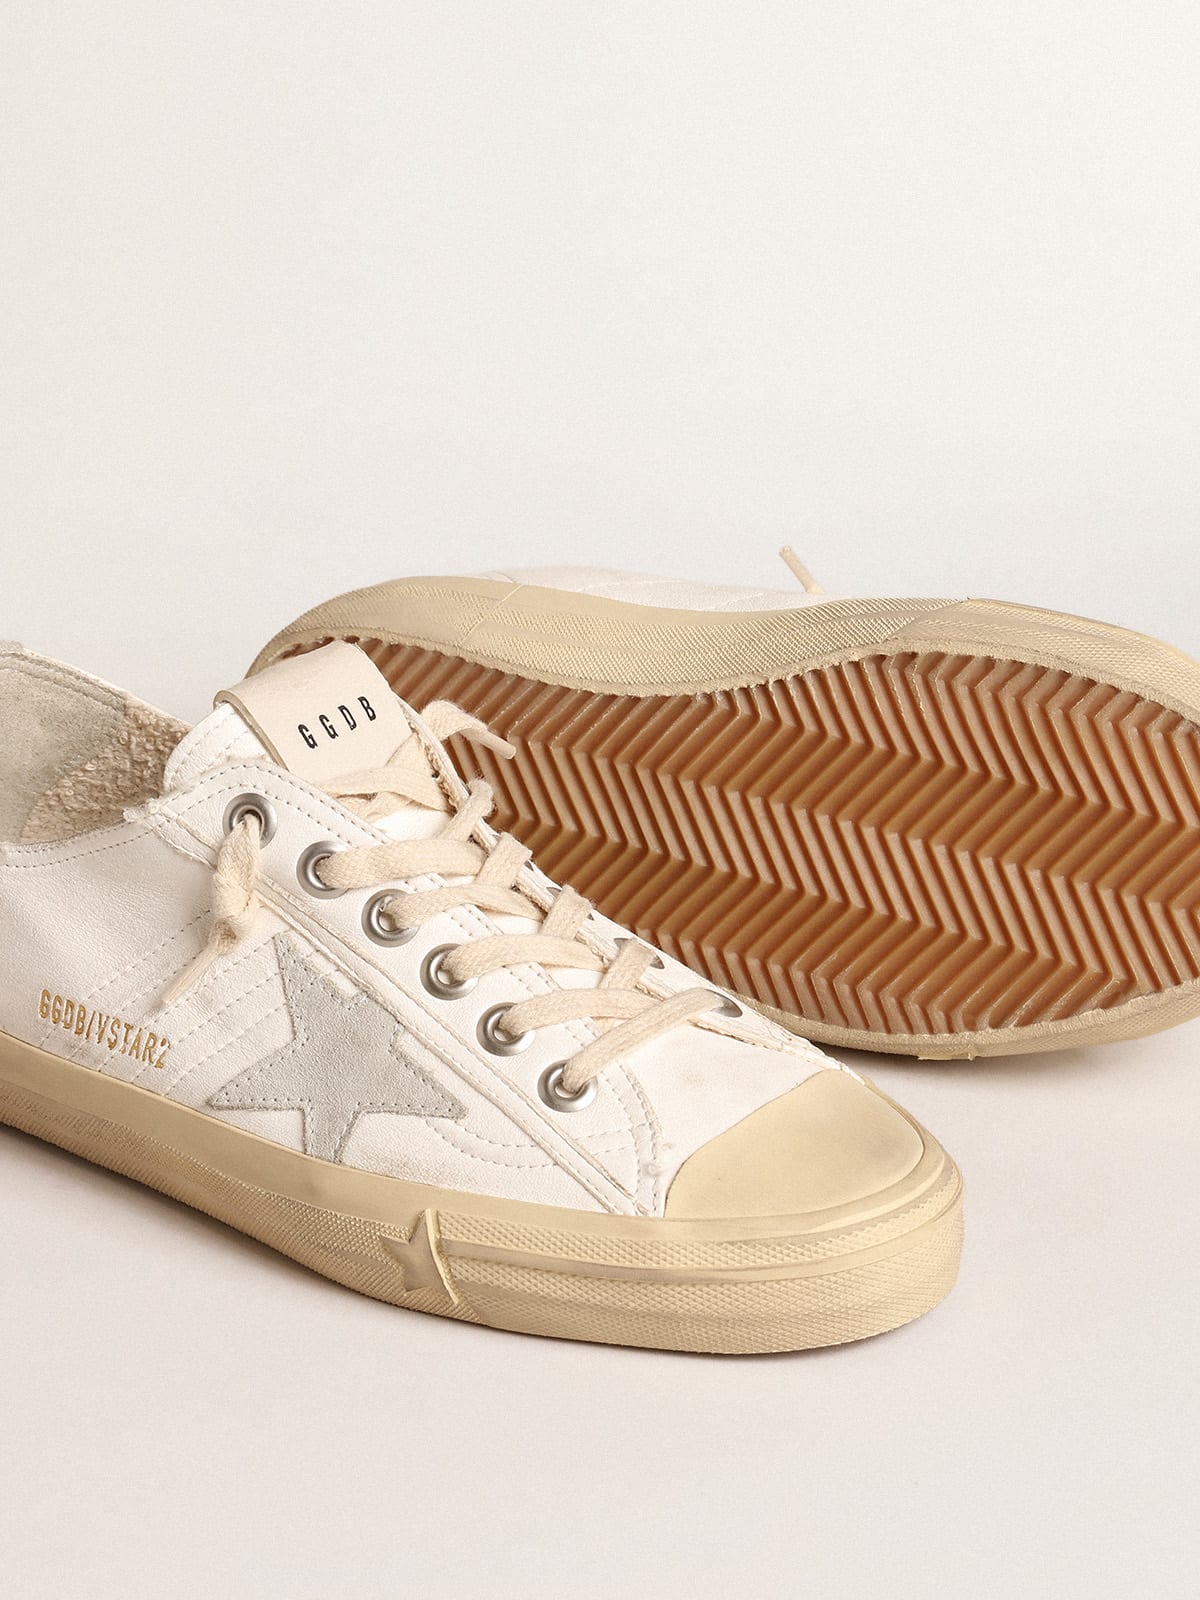 Golden Goose - V-Star in nappa leather with ice-gray suede star and heel tab in 